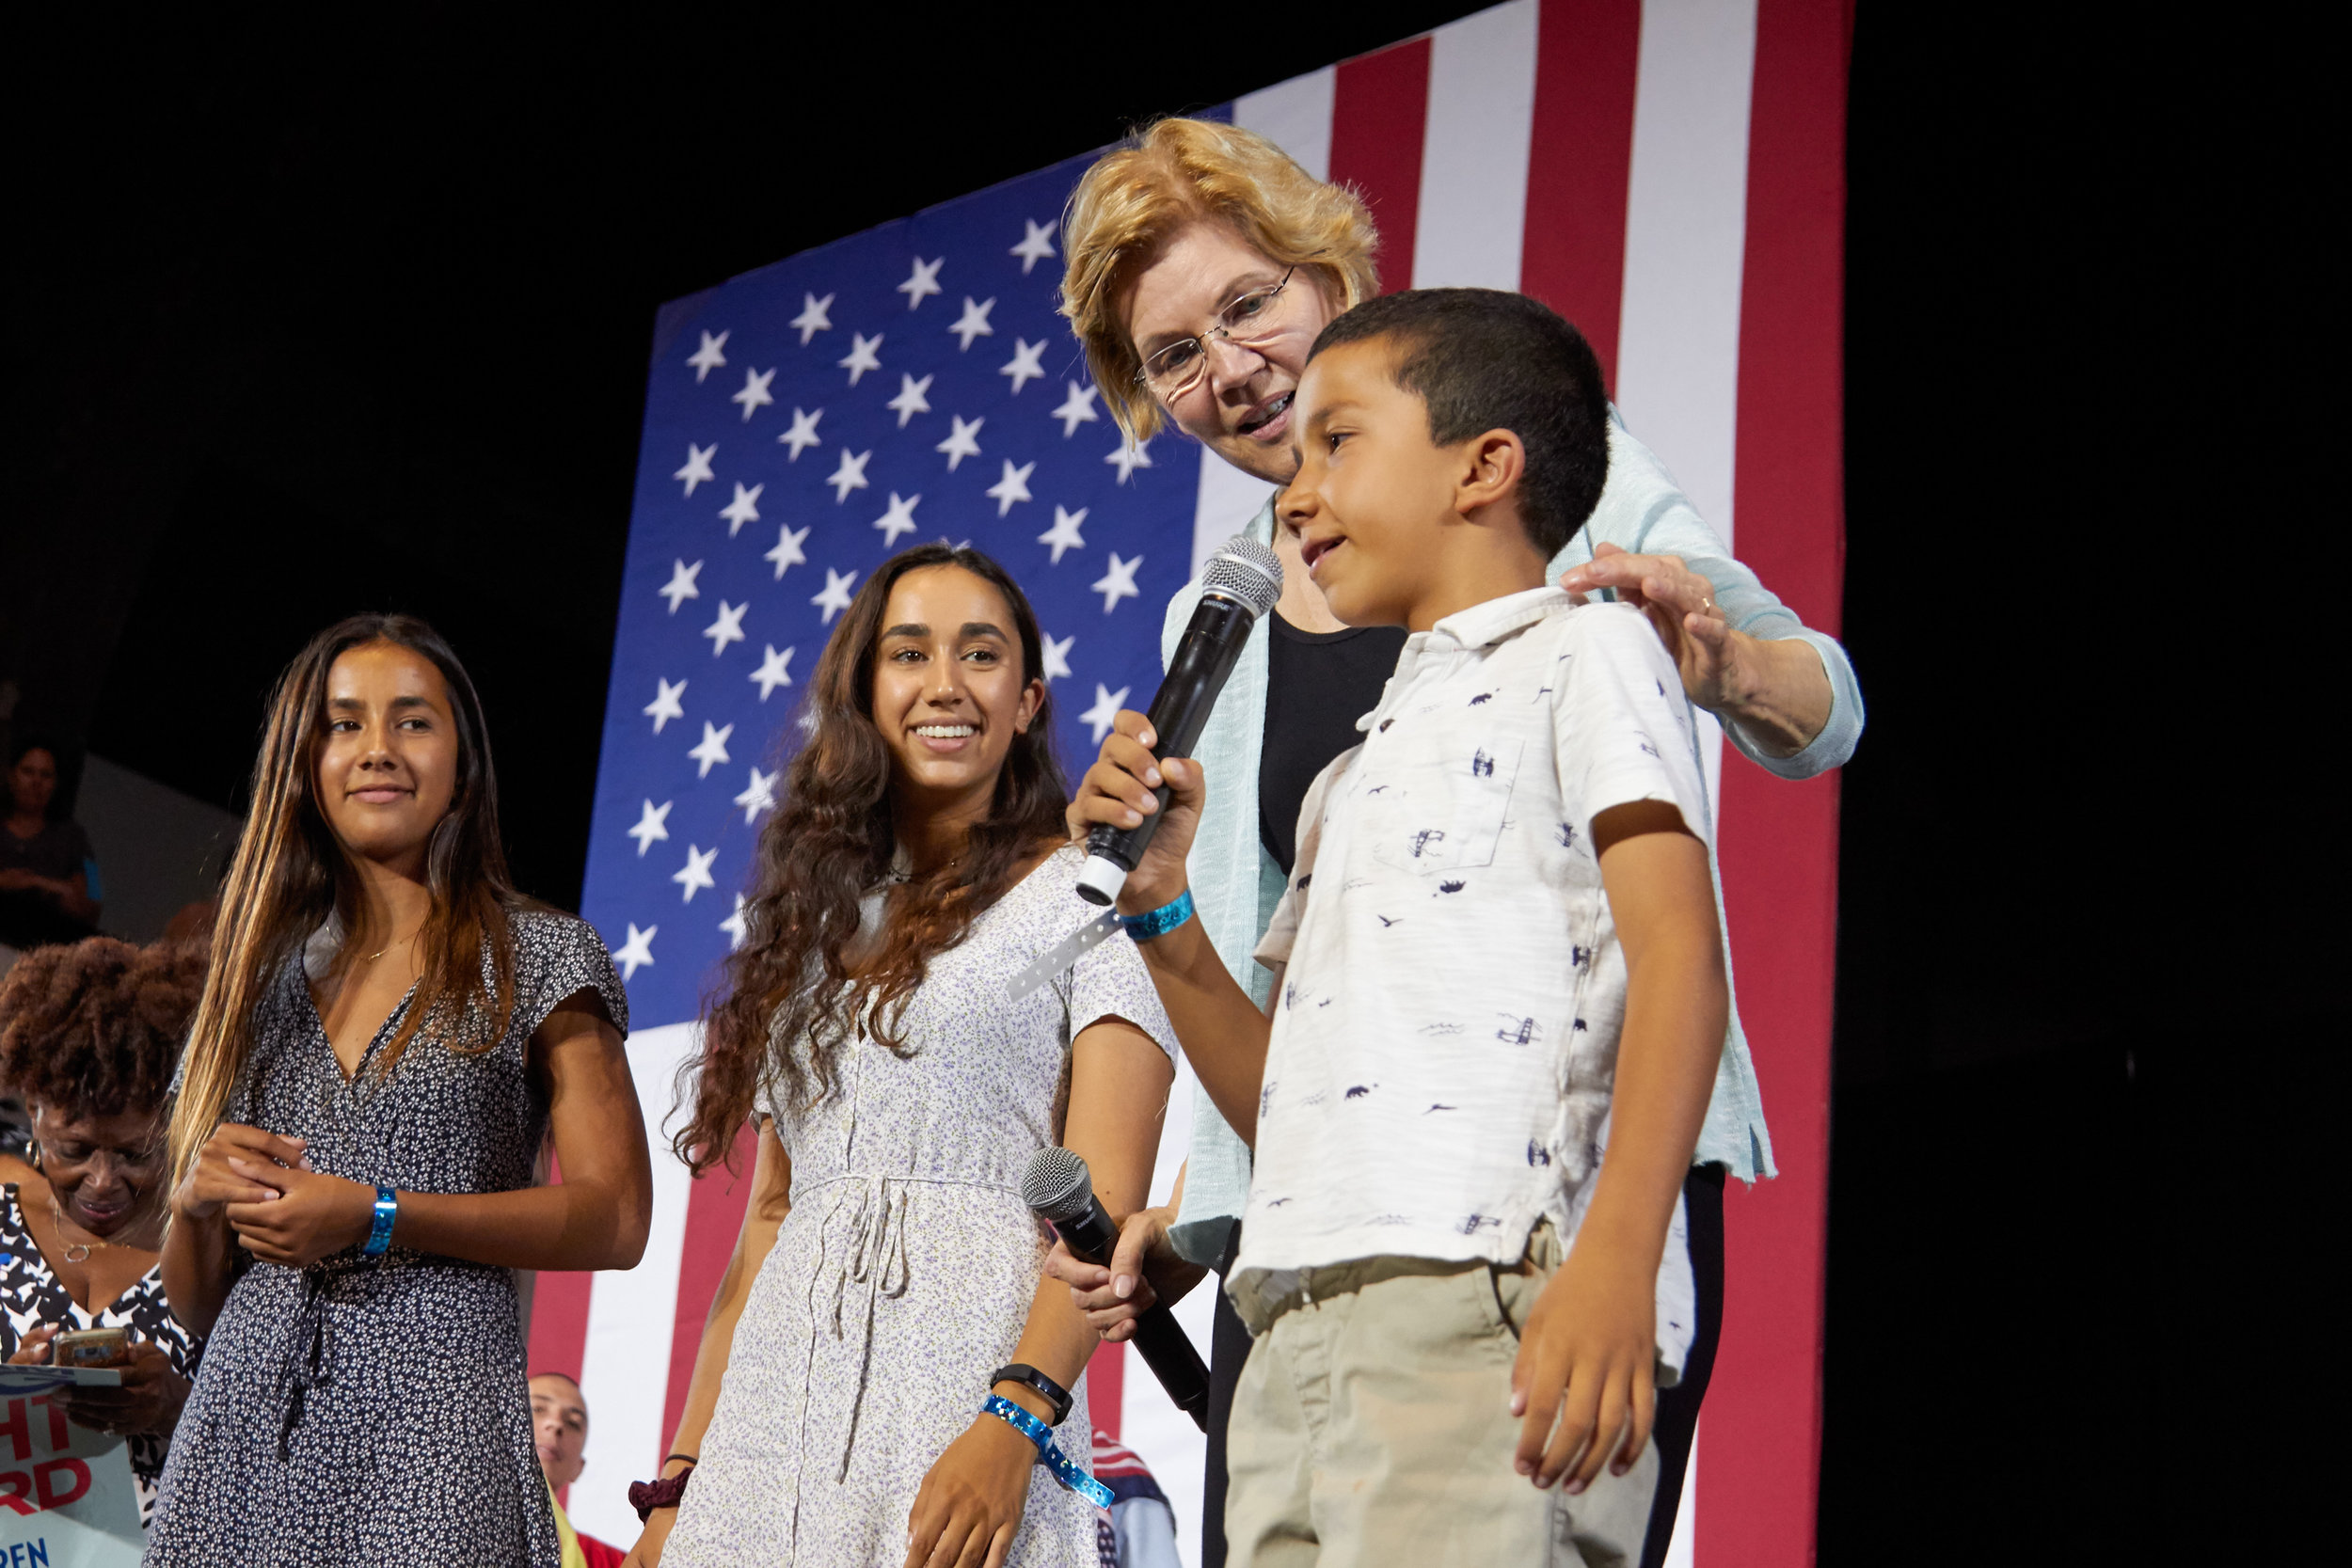  Massachusetts senator Elizabeth Warren shares the stage with children at the end of her Town Hall event for her presidential campaign, at the Shrine Expo Hall, Los Angeles, California, on August 21st 2019. (Marco Pallotti/The Corsair) 